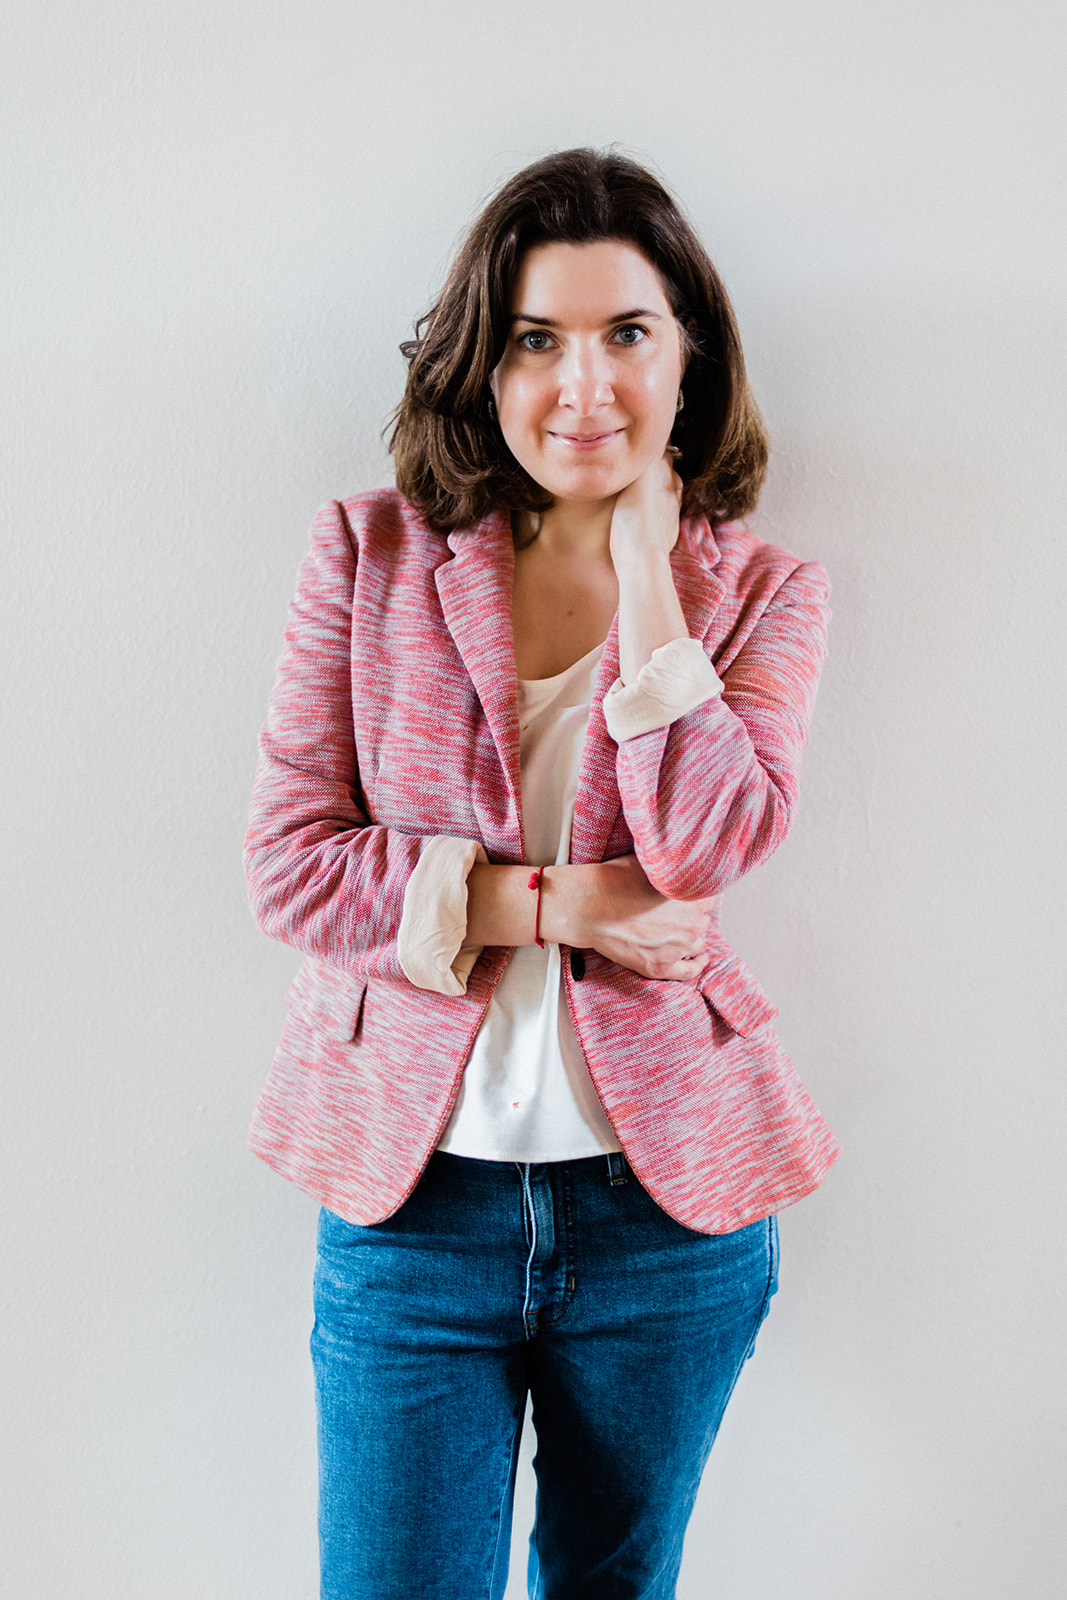 Confident woman in a pink blazer and jeans with her chin resting on her hand, resembling the expertise of Andrea Shah, the wedding website copywriter.